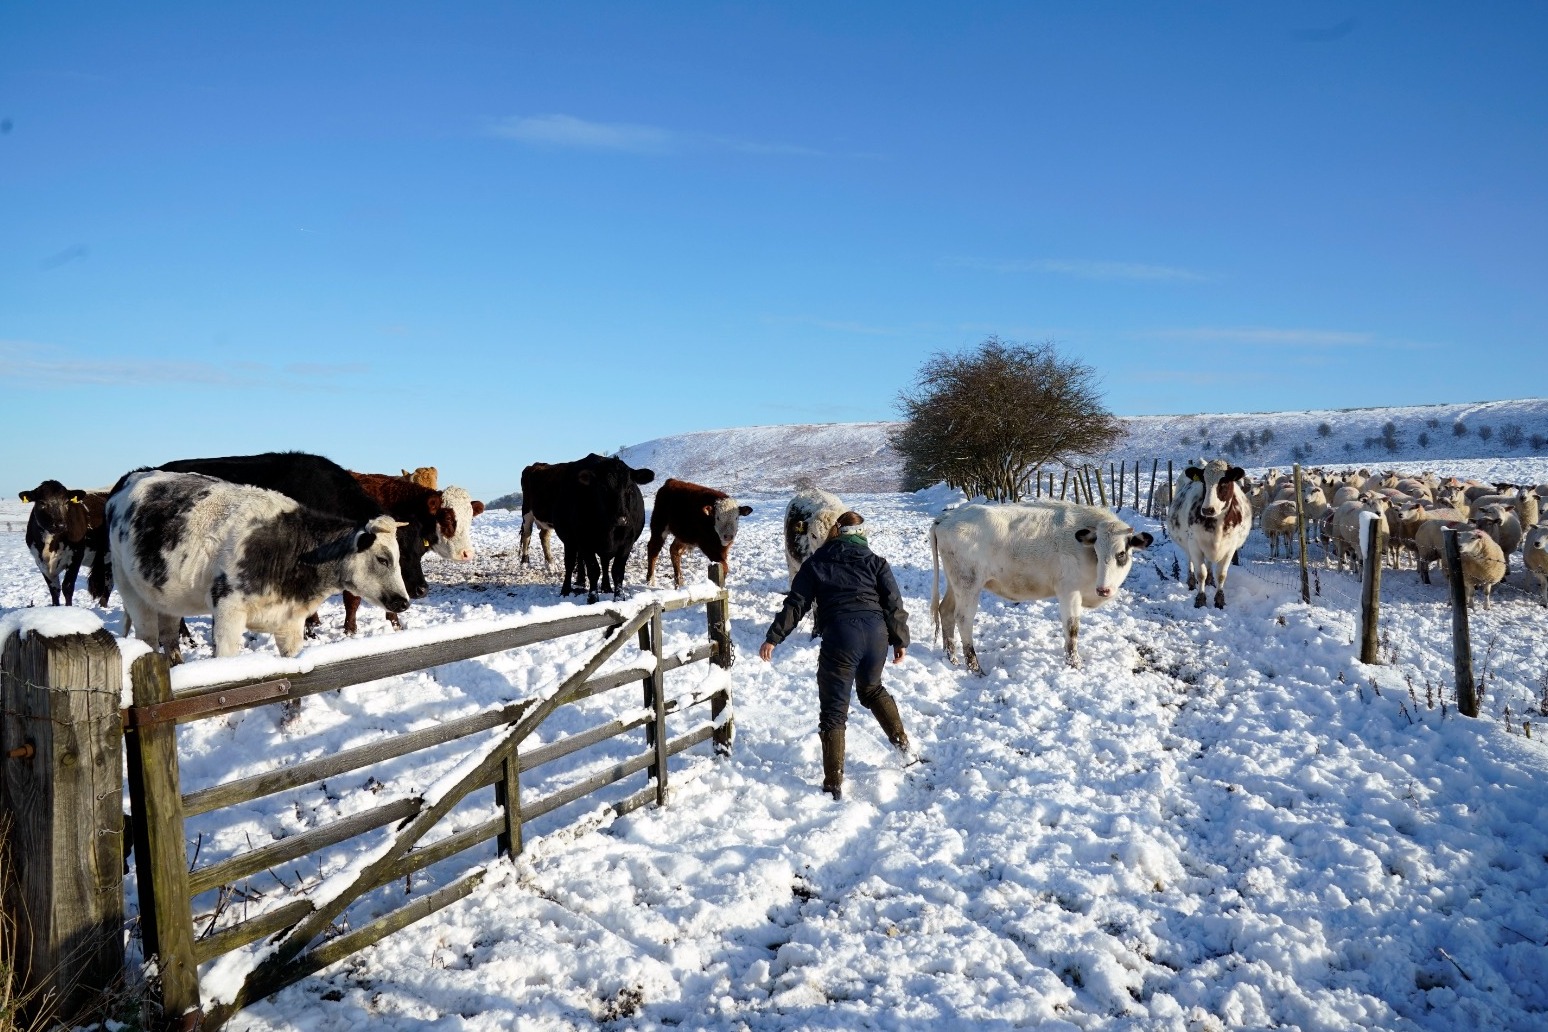 Warning of ‘very treacherous’ conditions as thawed snow refreezes 